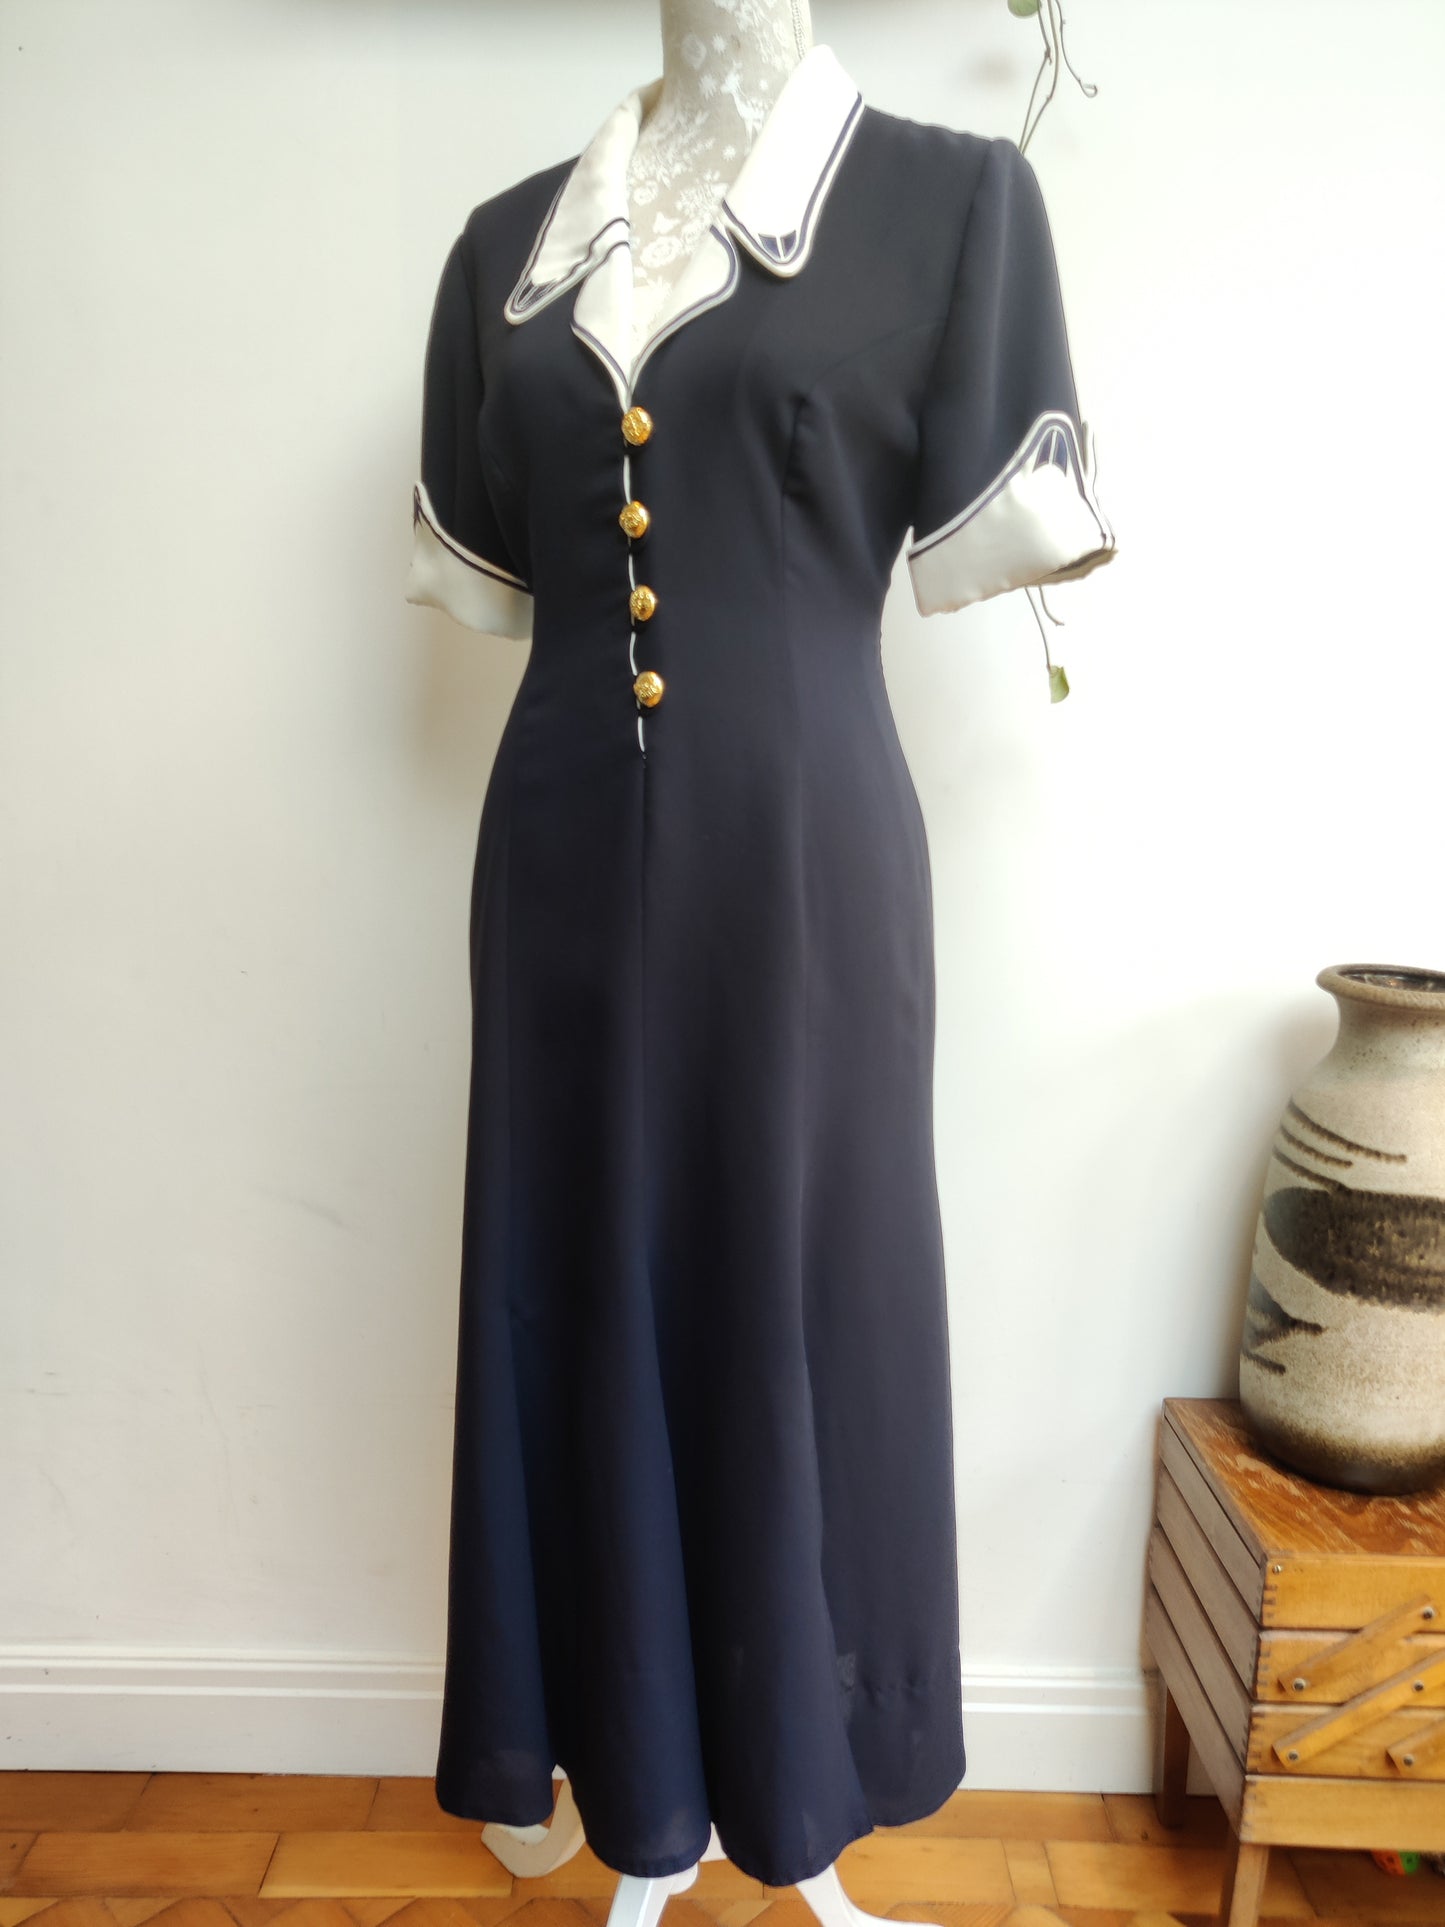 vintage dress navy and white. size 14-16